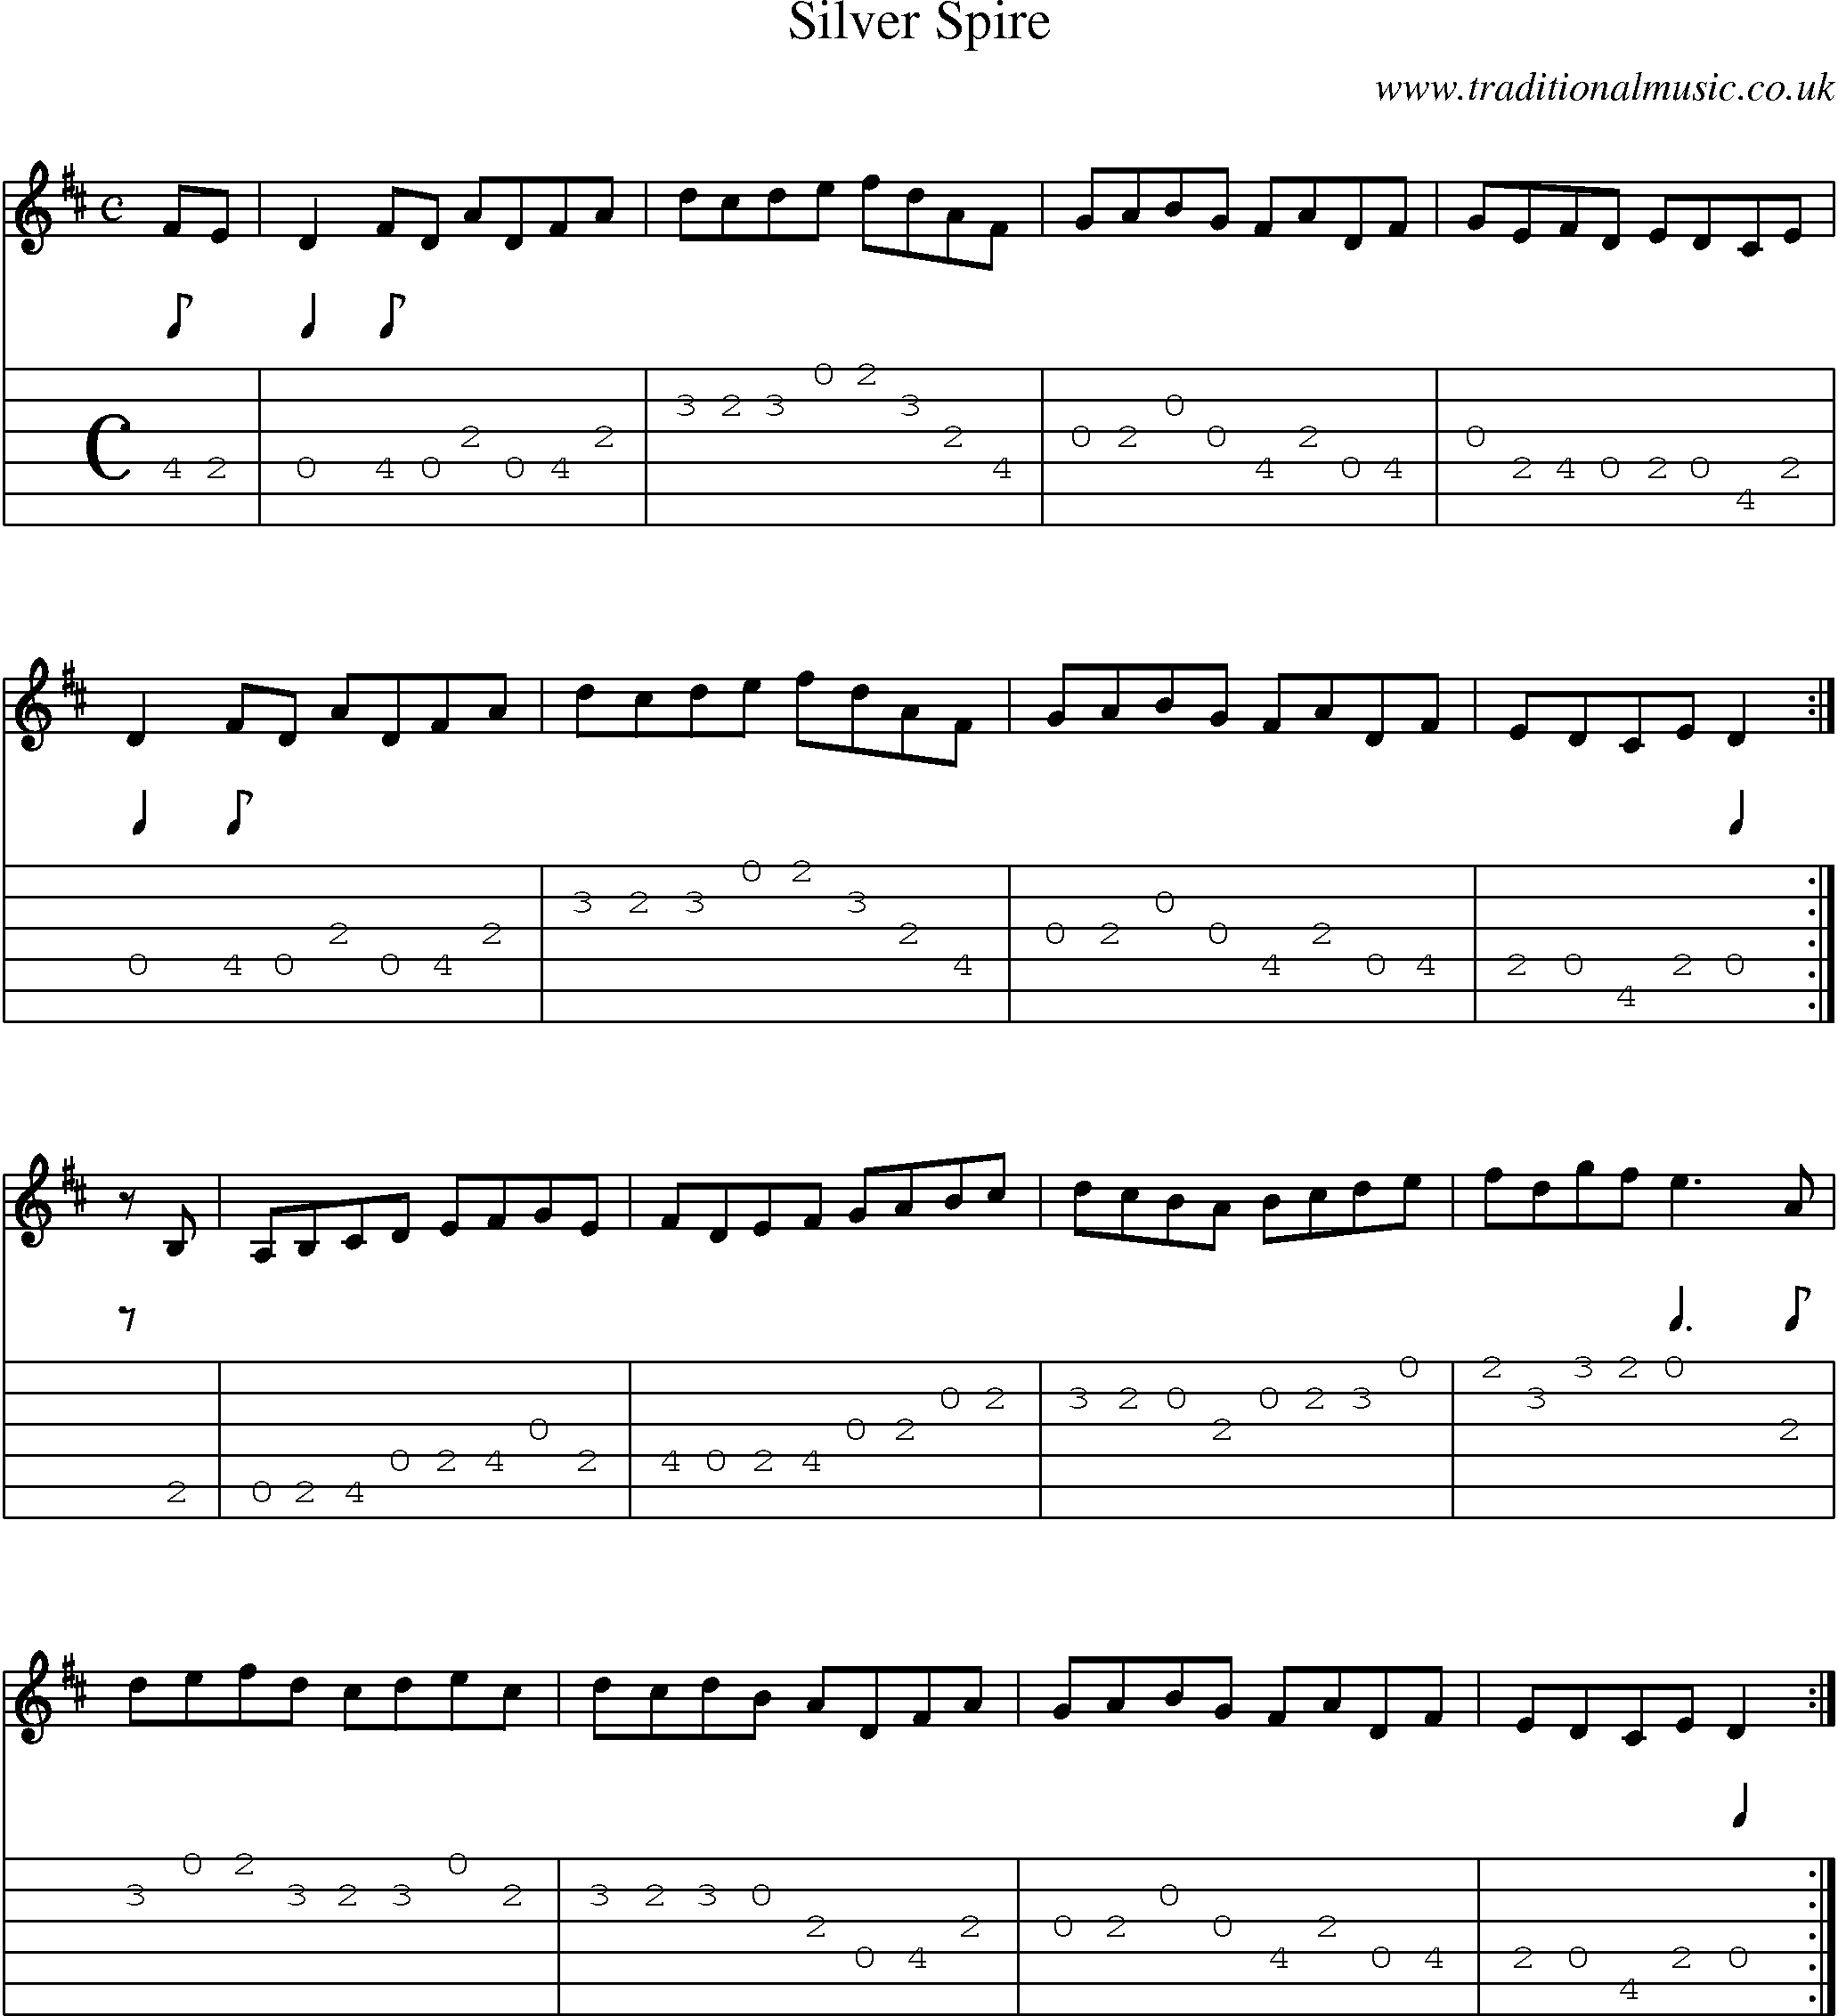 Music Score and Guitar Tabs for Silver Spire